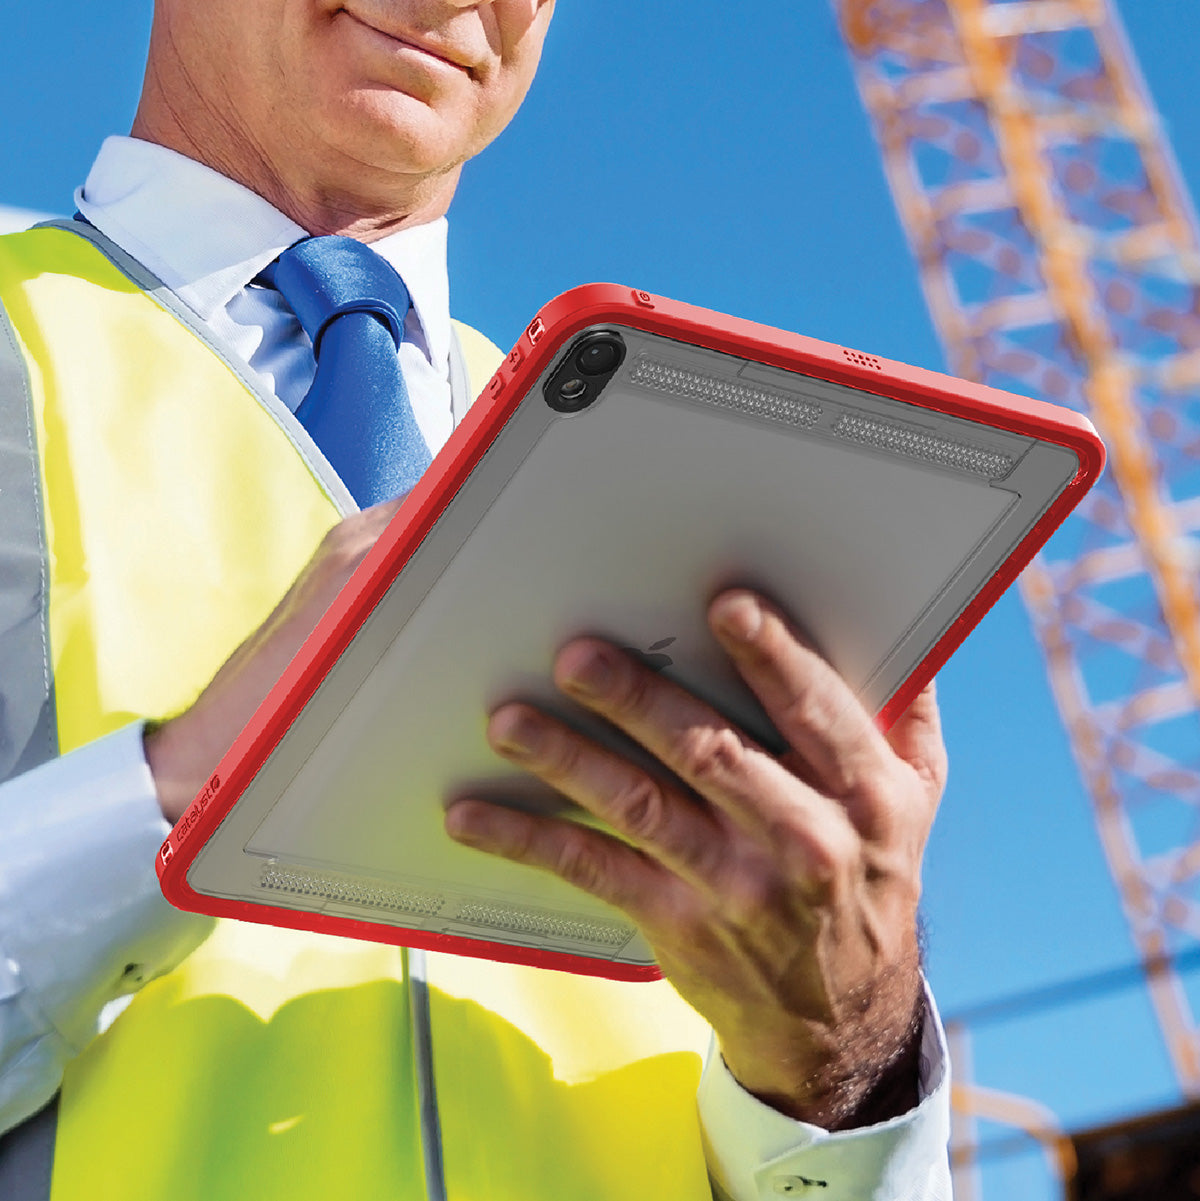 Catalyst iPad Pro (Gen 1), 11" - Waterproof Case showing a man using an ipad with the catalyst case installed